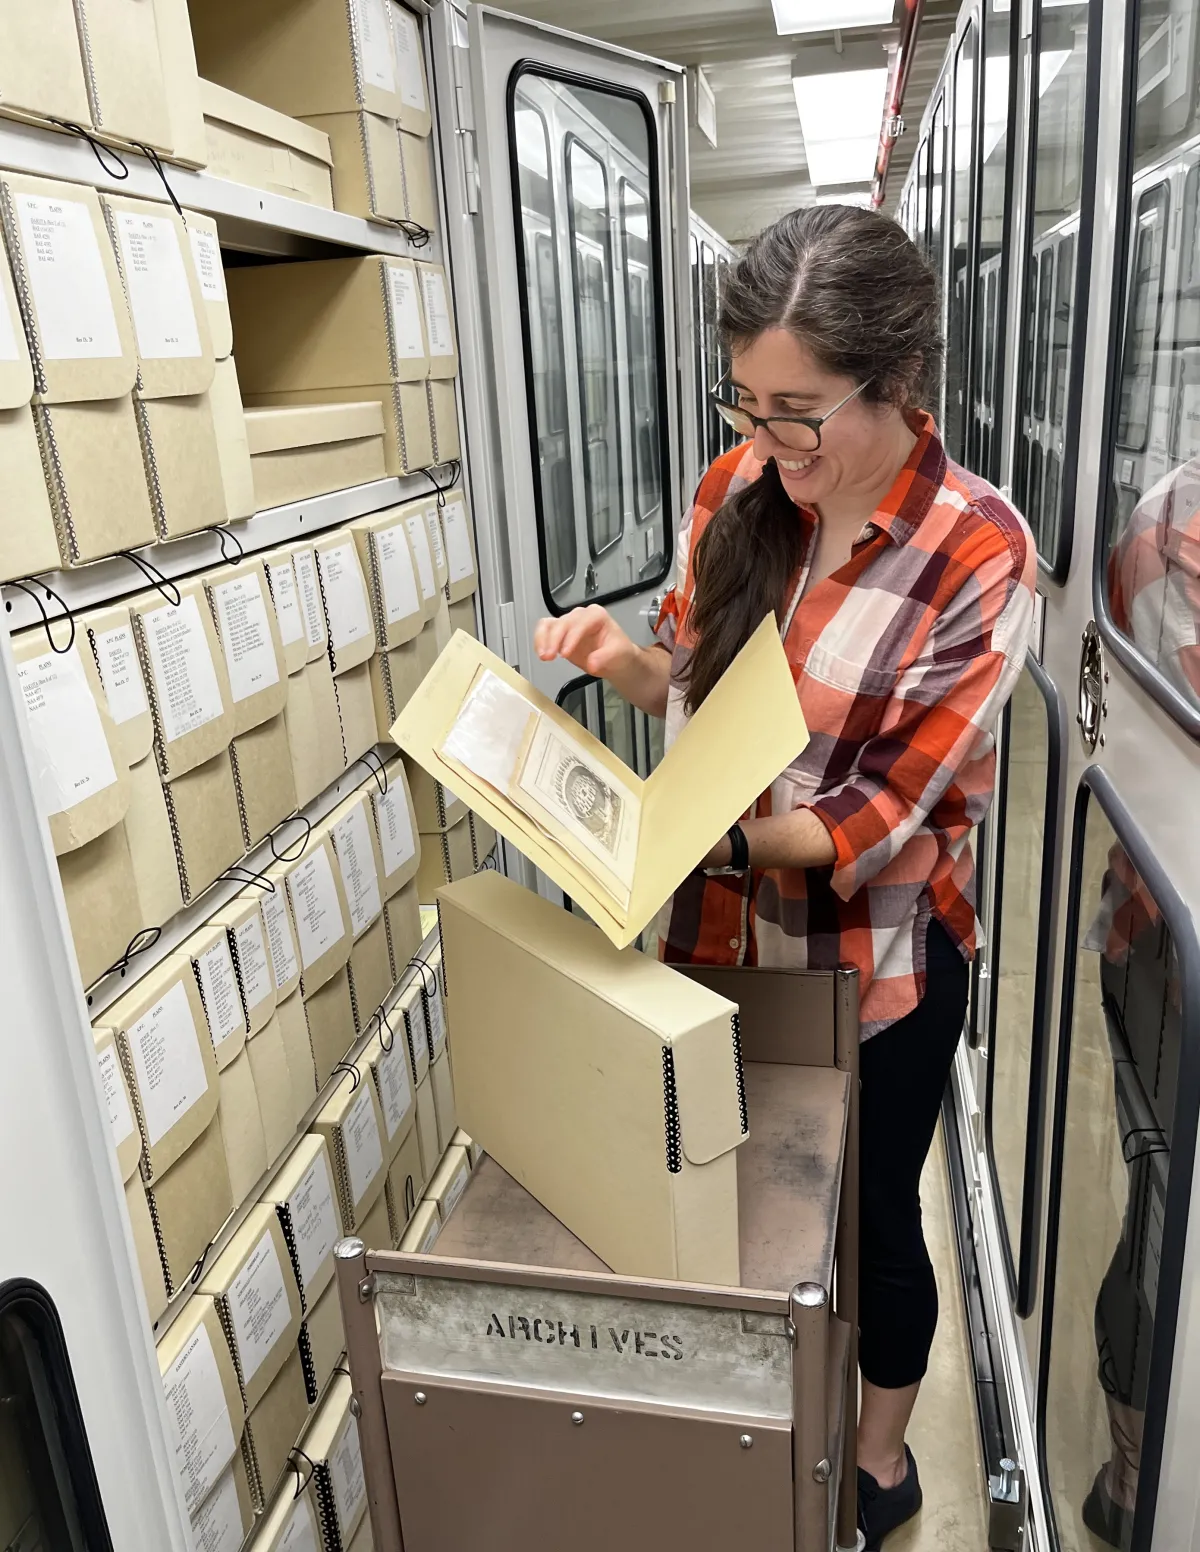 SIMA intern, standing in a long hallway lined with cabinets. She is standing in front of an open cabinet that is lined with archival boxes. One of the boxes is pulled out on a cart in front of her. She is holding a folder and looking at documents.